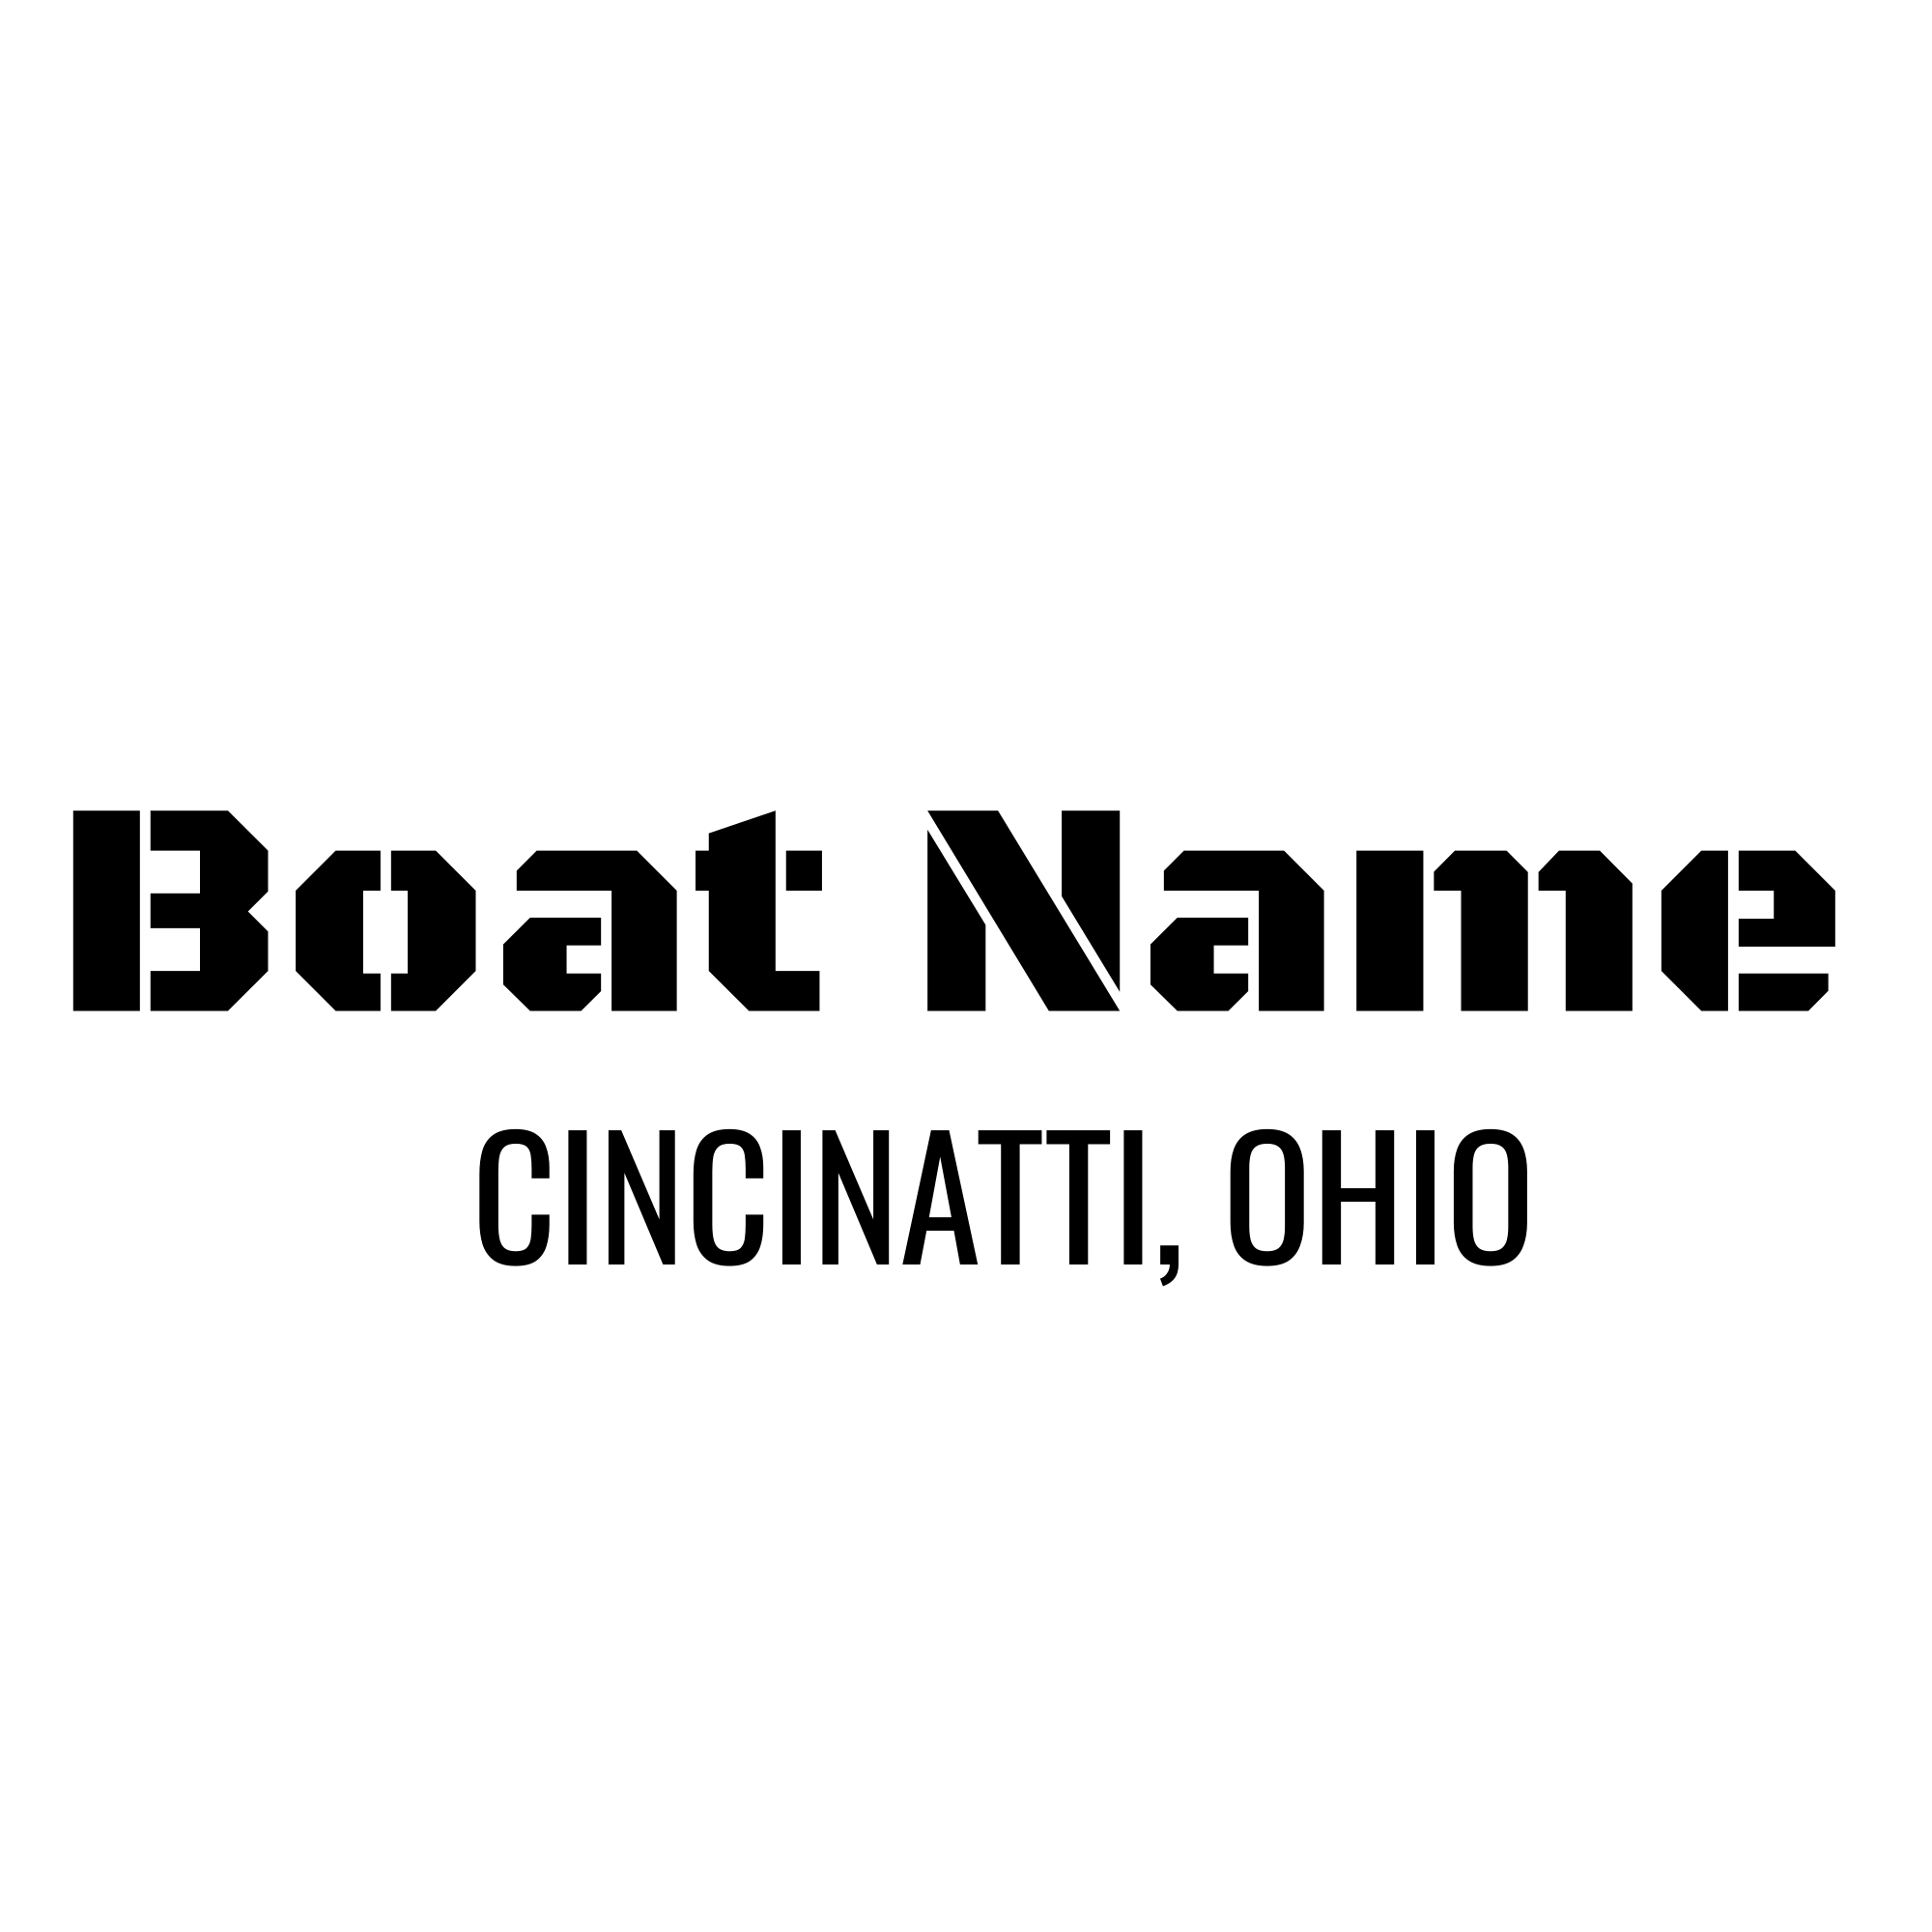 Personalized Boat Name Vinyl Decal with Hailing Port State - Permanent Marine-Grade for Signs, Speed boat, Fishing Vessel, Watercraft B5, B1